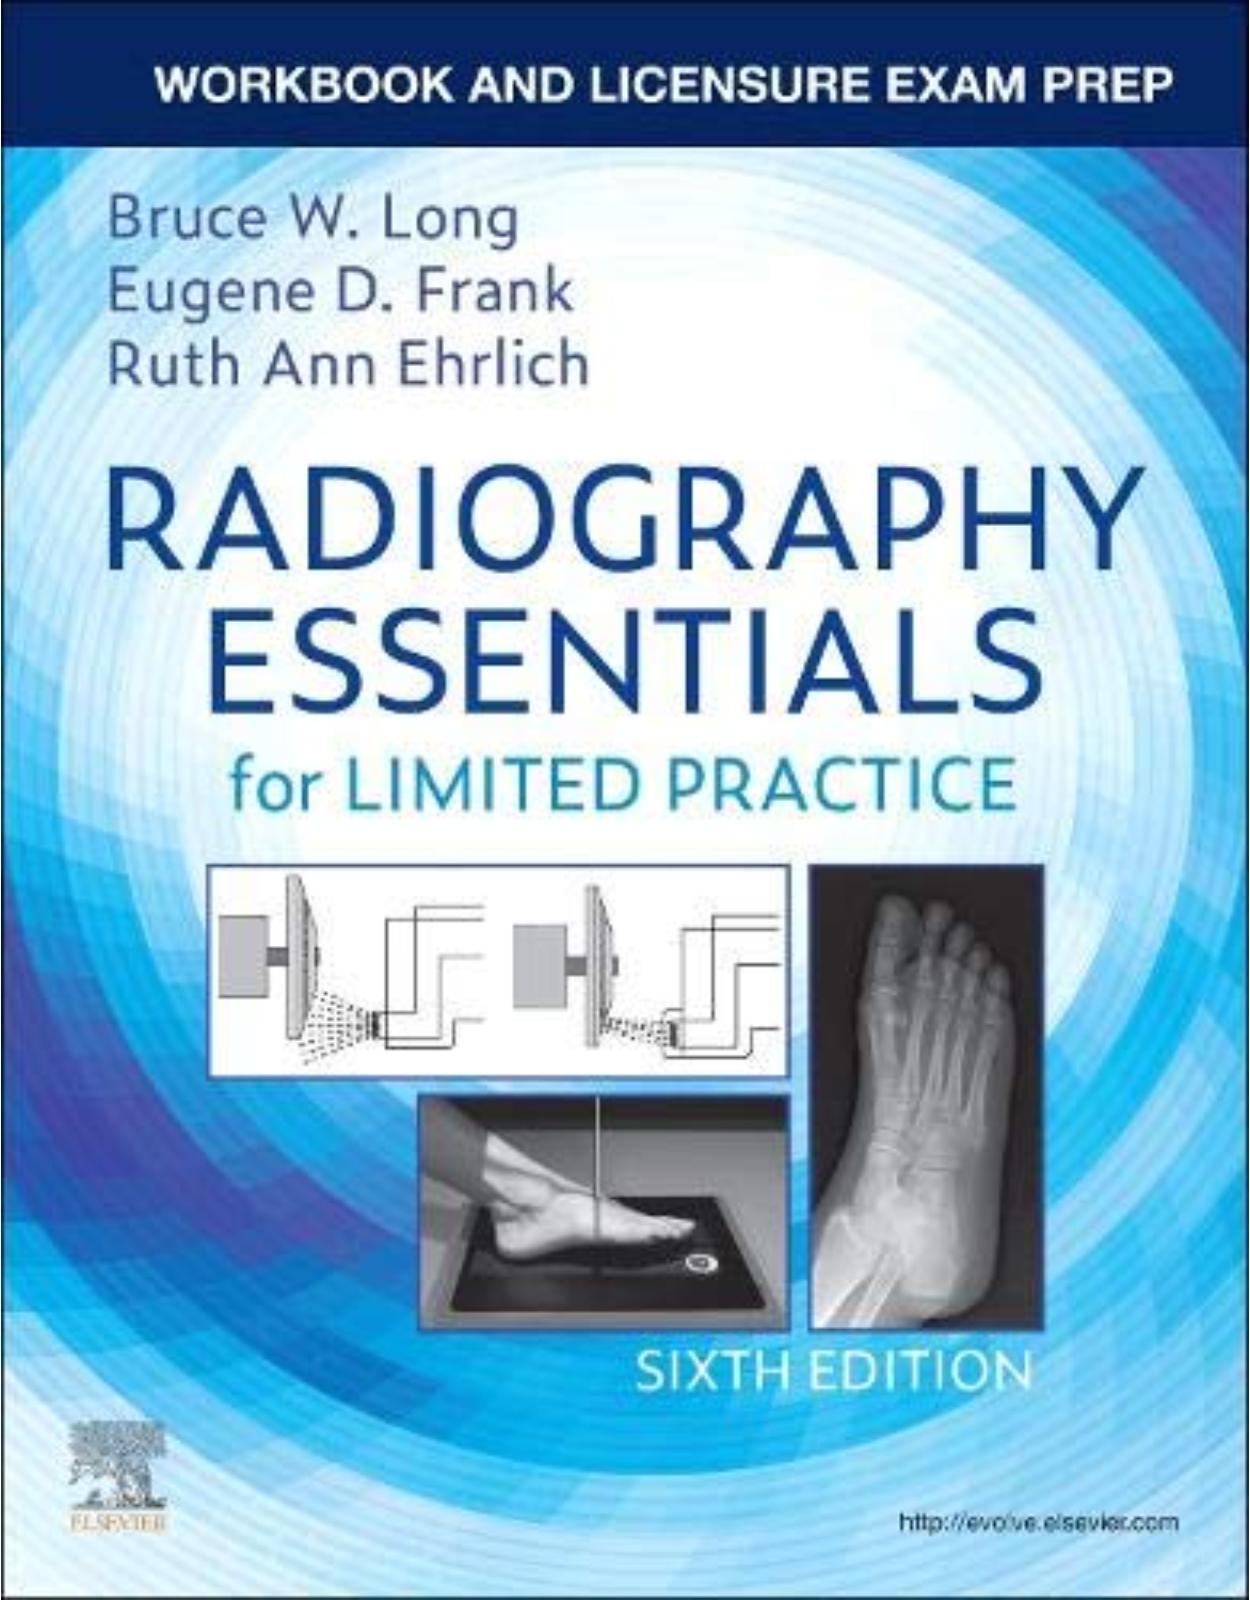 Workbook and Licensure Exam Prep for Radiography Essentials for Limited Practice, 6th Edition